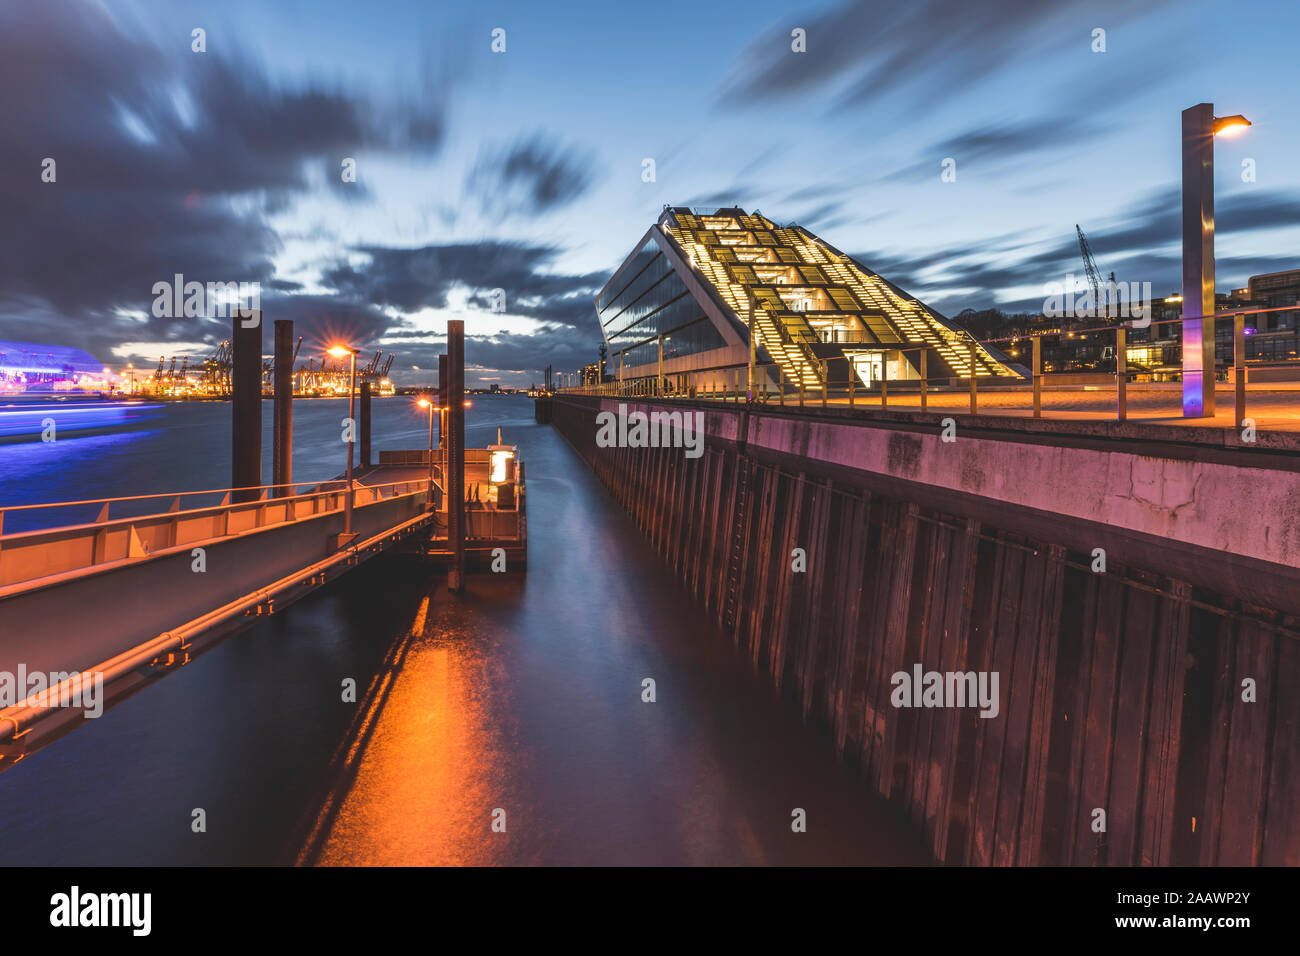 View of Dockland building by Elbe River against sky in Hamburg at dusk, Germany Stock Photo